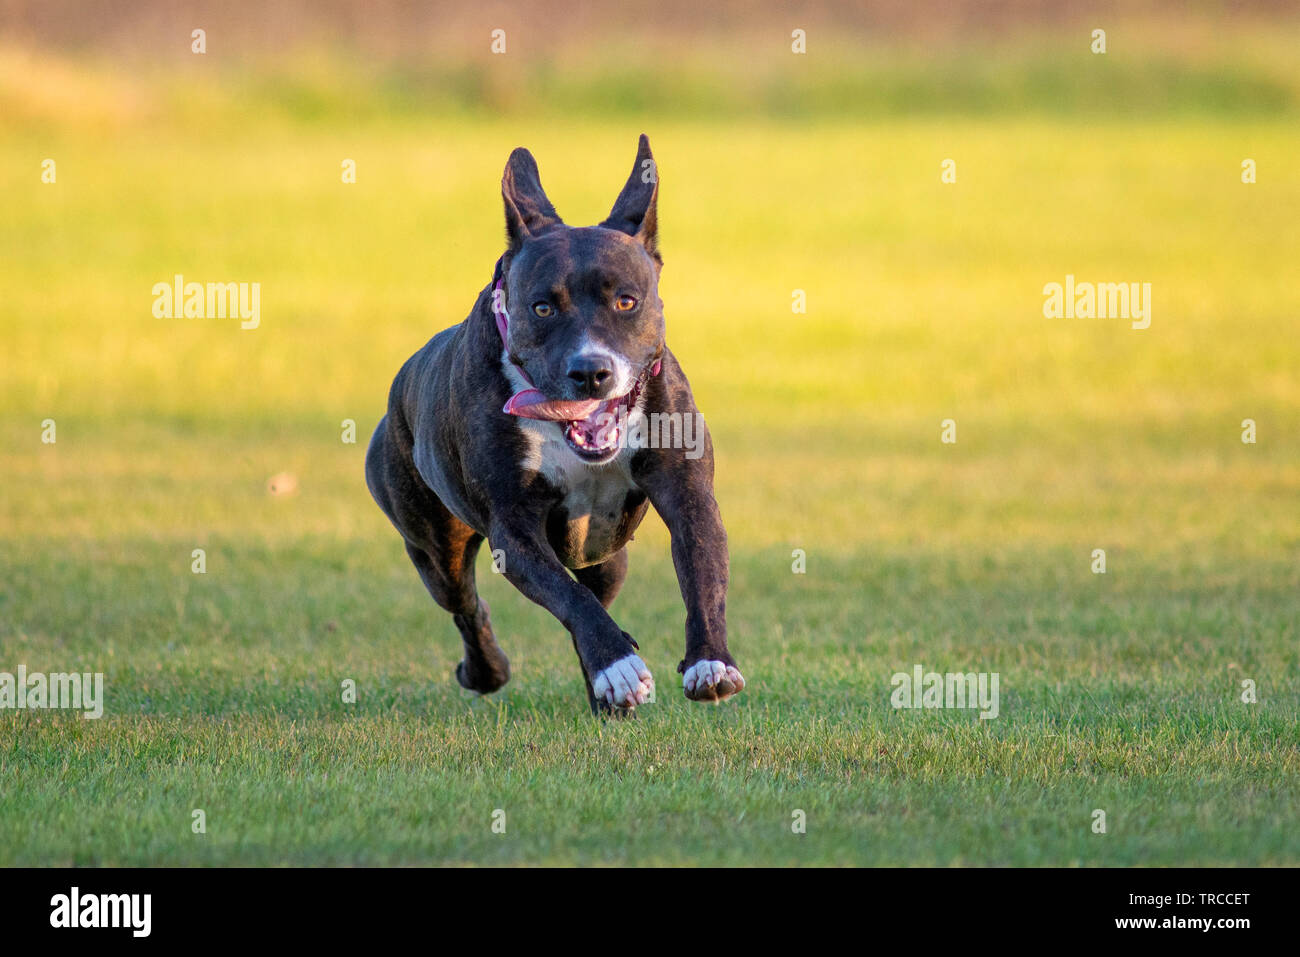 American staffordshire terrier running fast and free Stock Photo